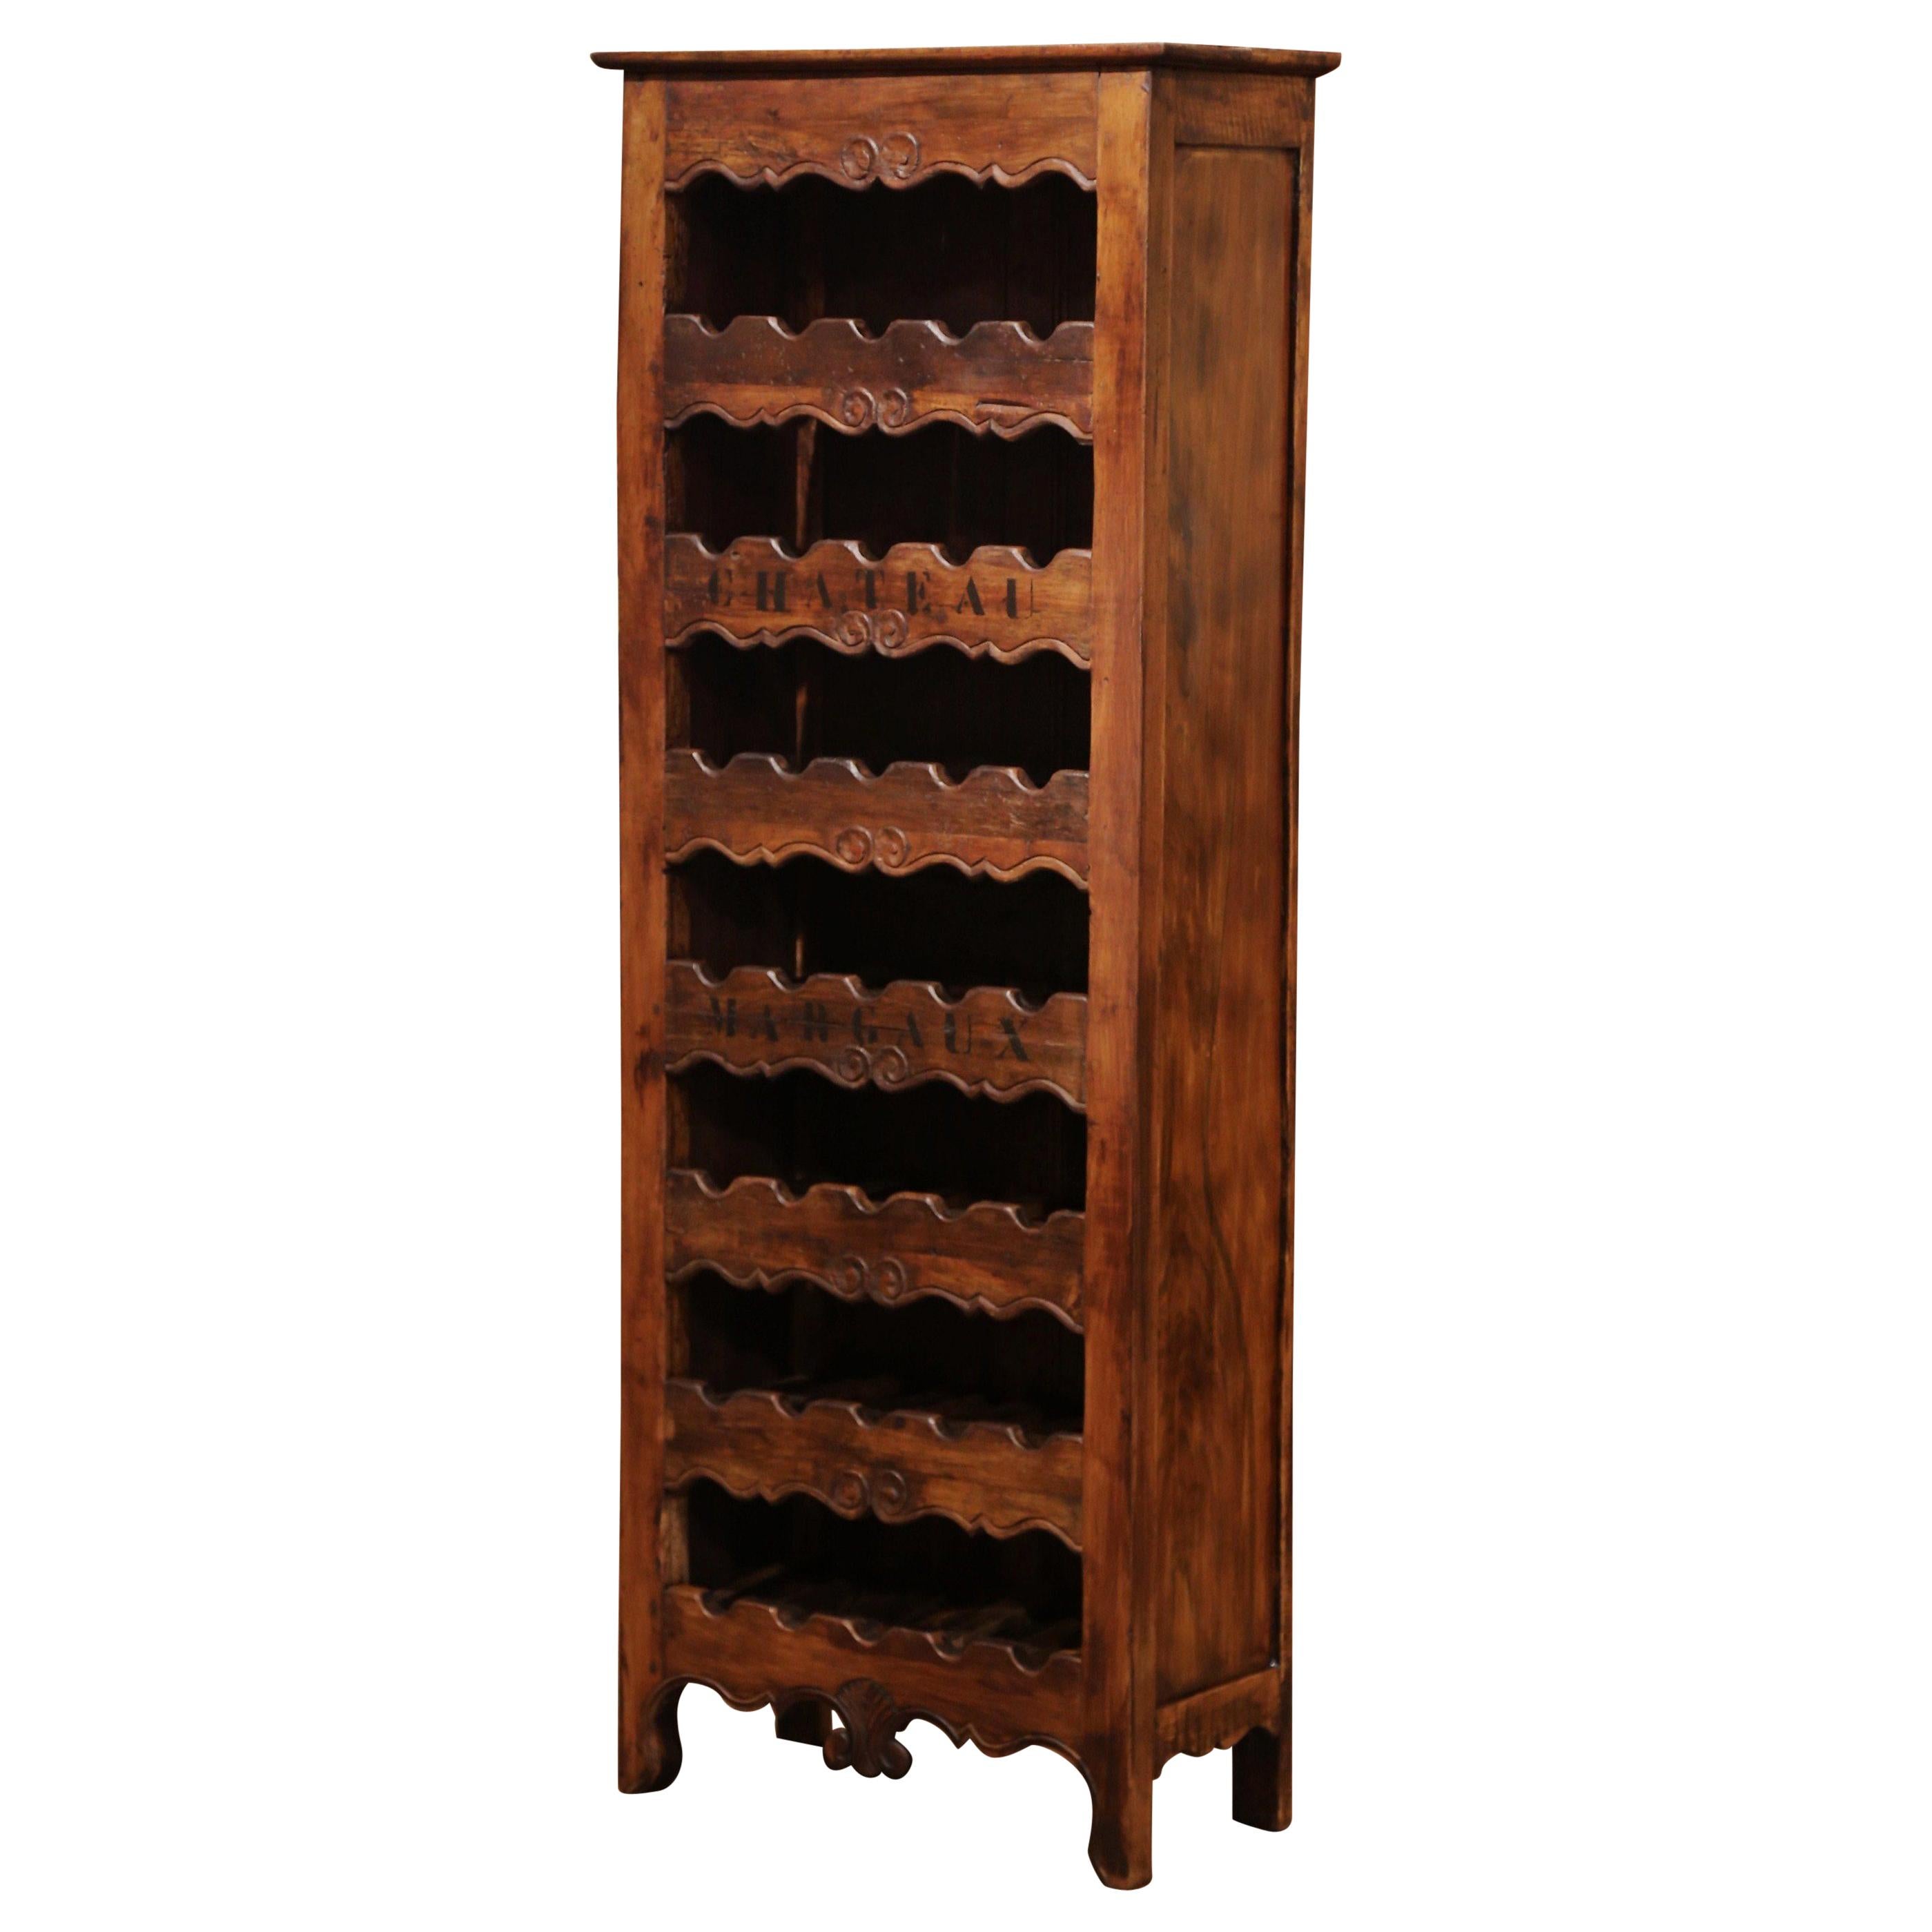 Louis XV Carved 28 Wine Bottle Holder Cabinet with "Chateau Margaux"